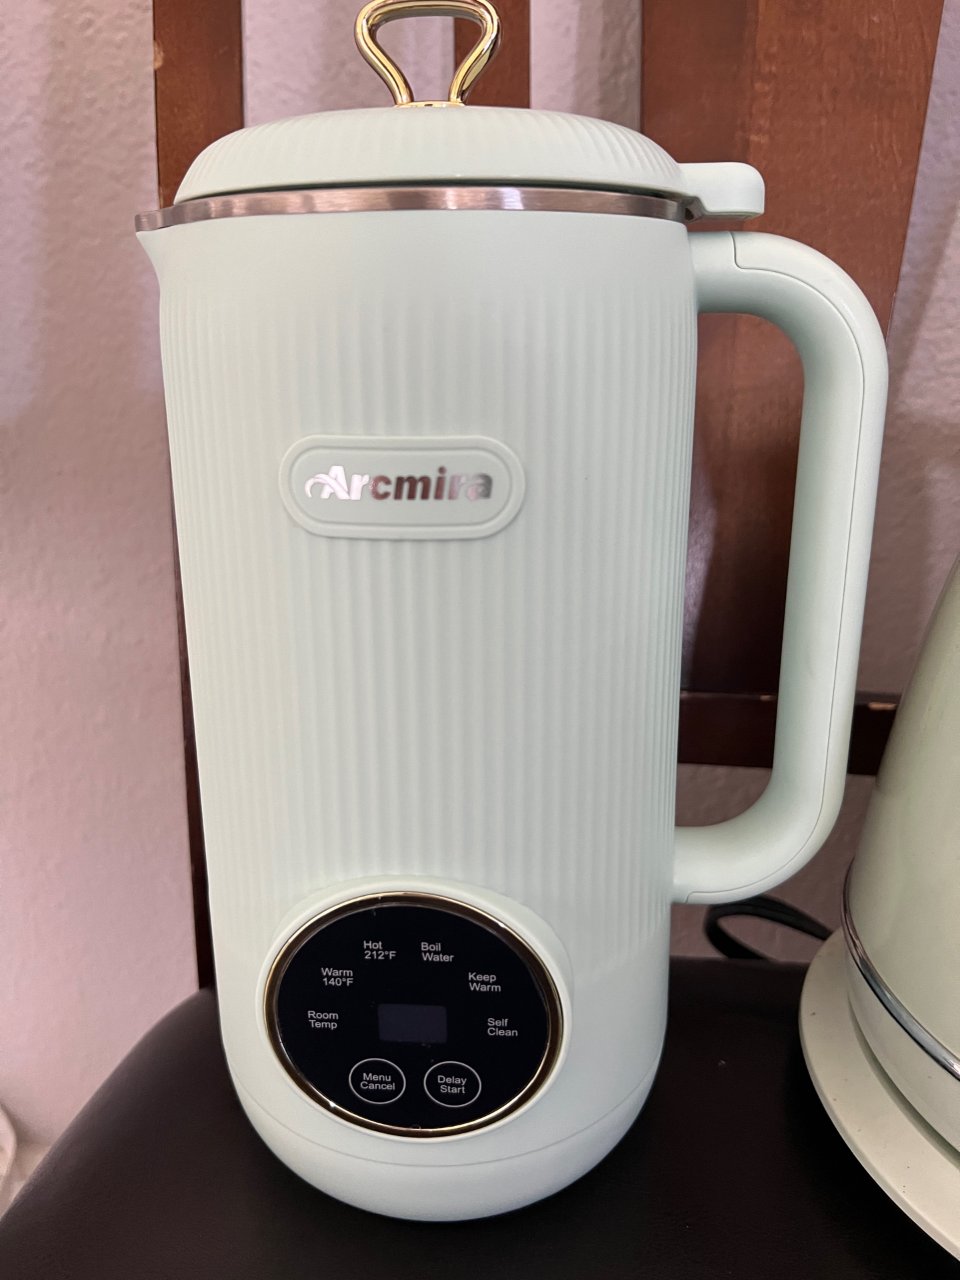 Arcmira Automatic Nut Milk Maker, 20 oz Homemade Almond, Oat, Soy, Plant-Based Milk and Dairy Free Beverages, Almond Milk Maker with Delay Start/Keep Warm/Boil Water, Soy Milk Maker with Nut Milk Bag,Yellow